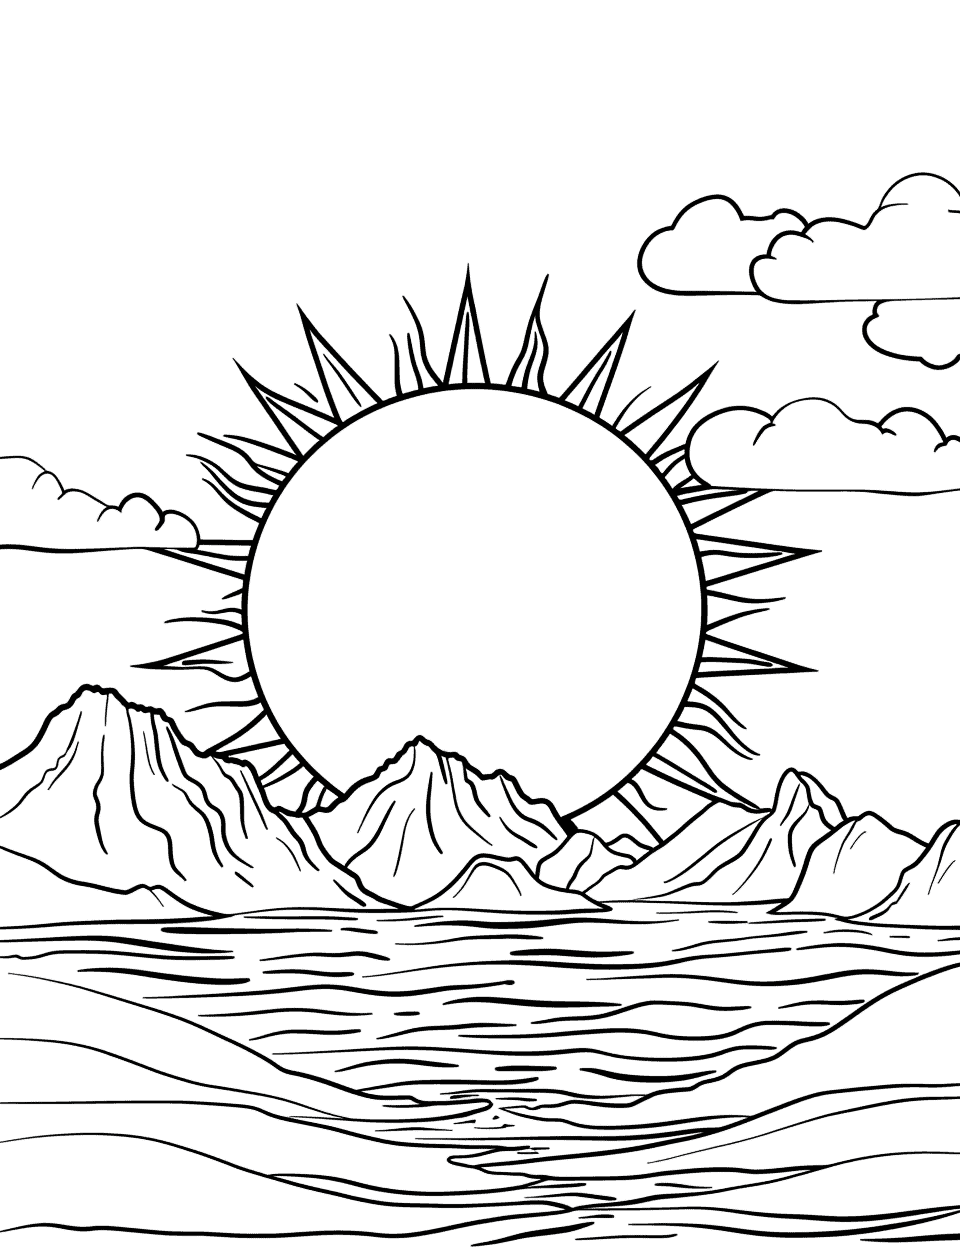 Winter Sun Over Mountains Coloring Page - A low winter sun shining over snow-covered mountains.